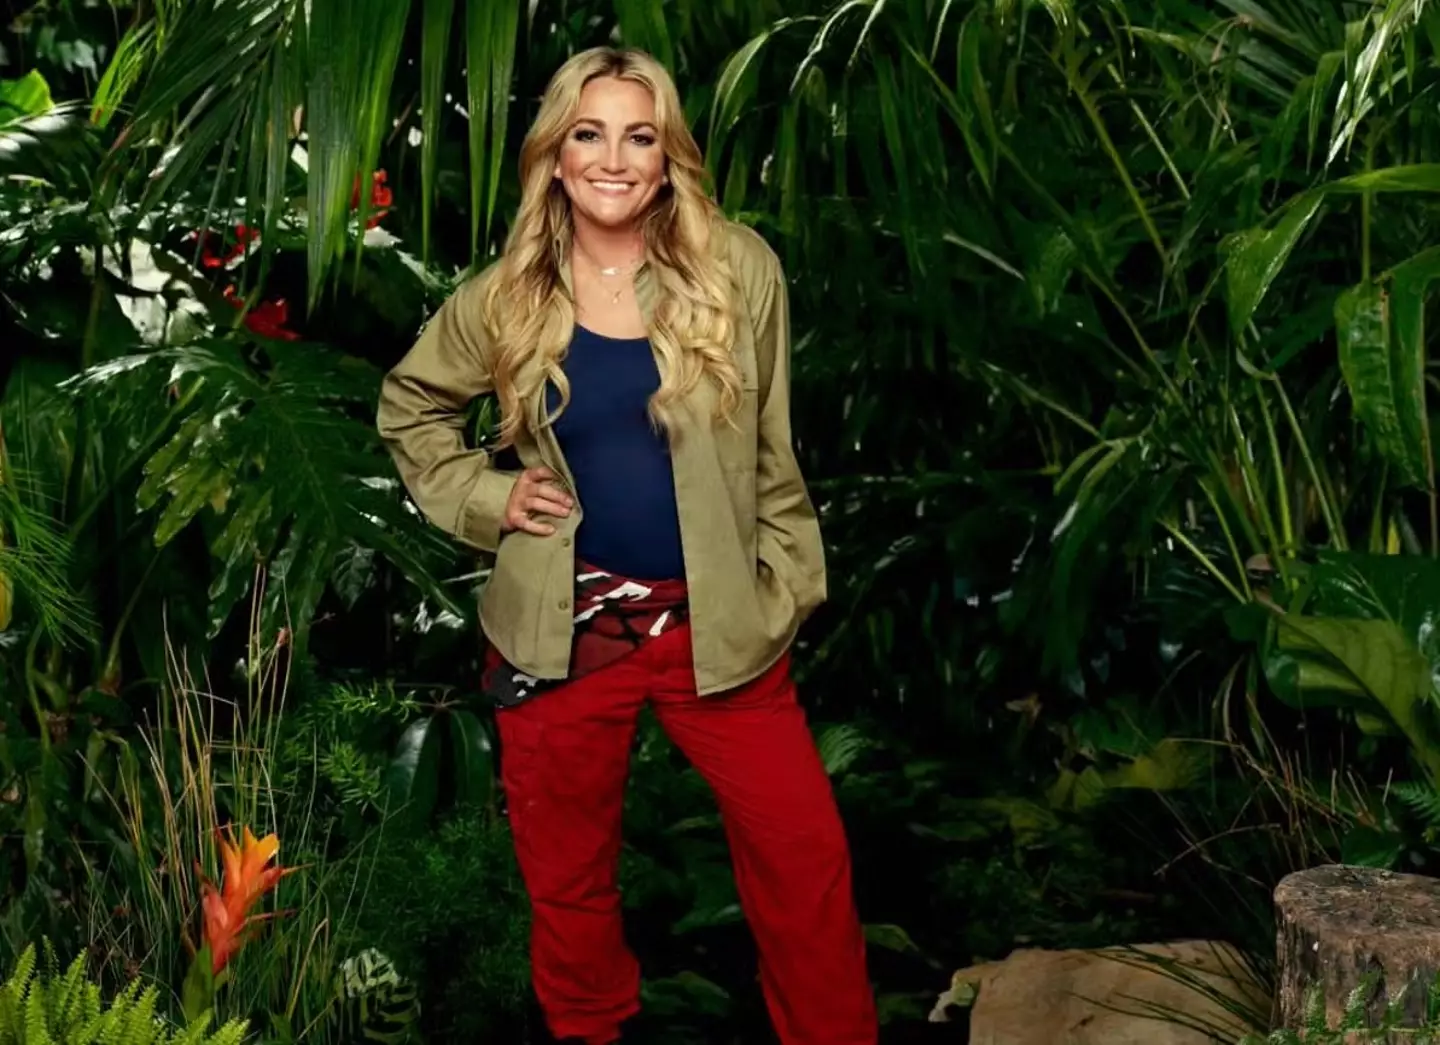 Jamie Lynn Spears will receive her full appearance fee, despite quitting the show.